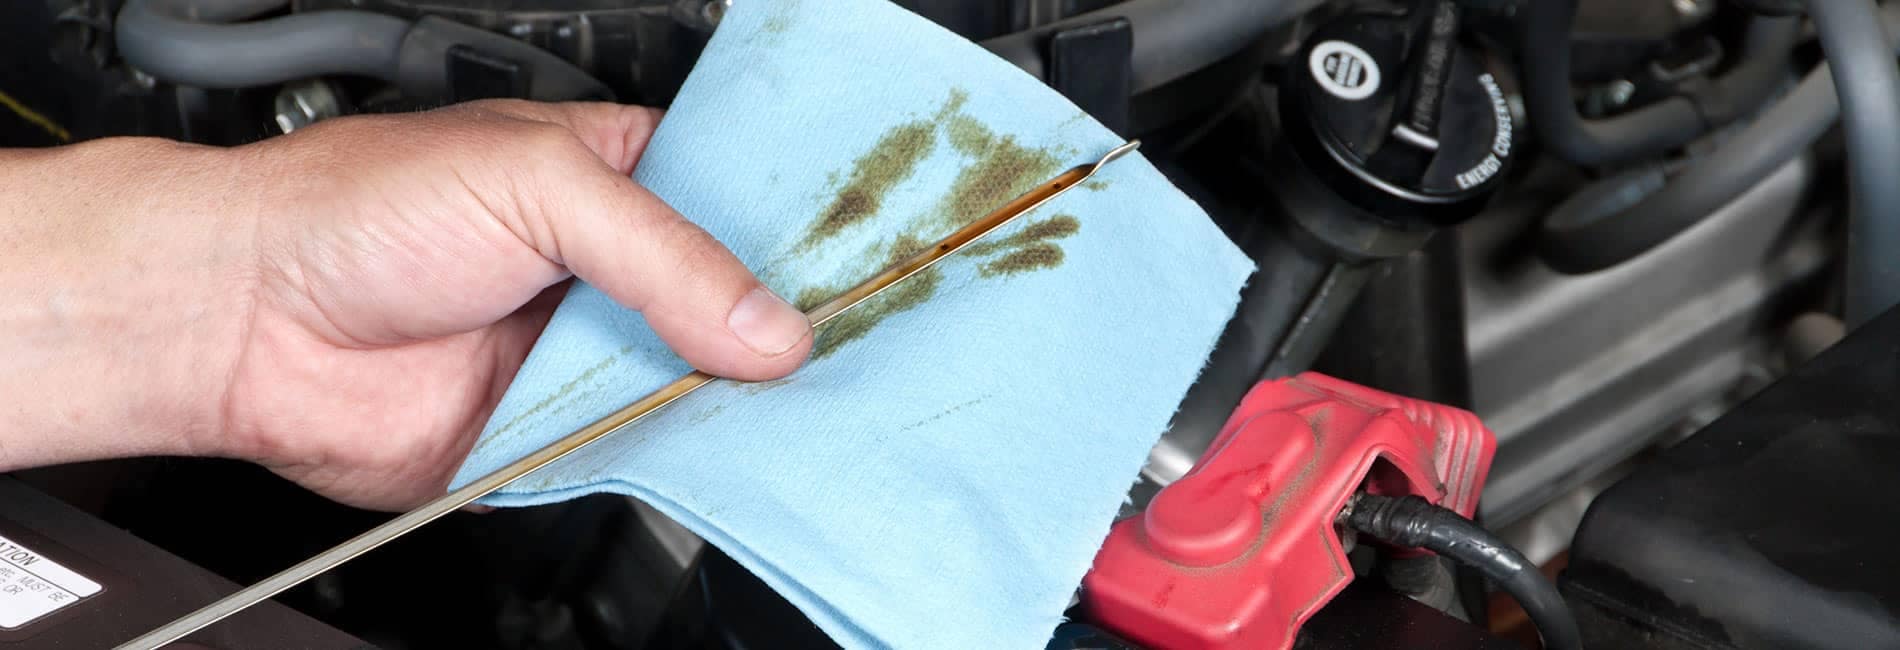 Oil picture of dipstick getting wiped onto blue papertowel